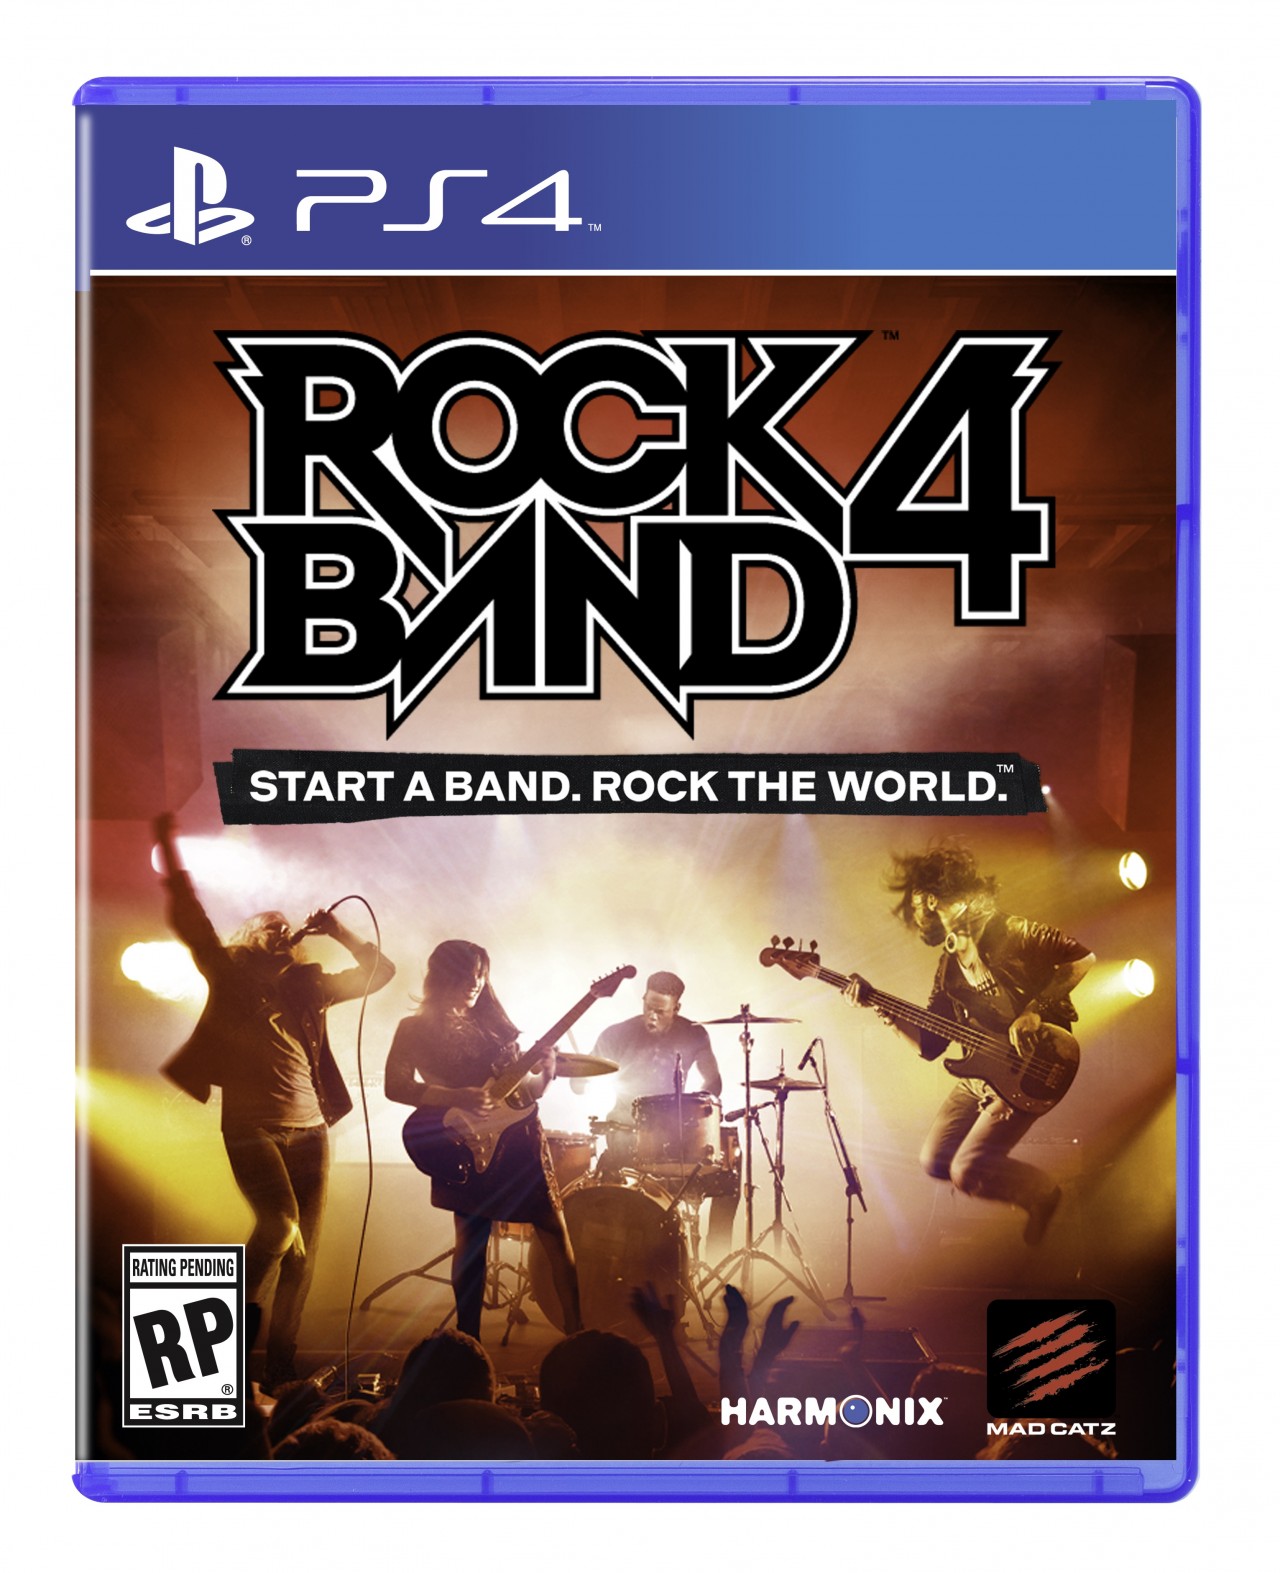 E3 2015 On: BAND The Game That Invented Social is Back